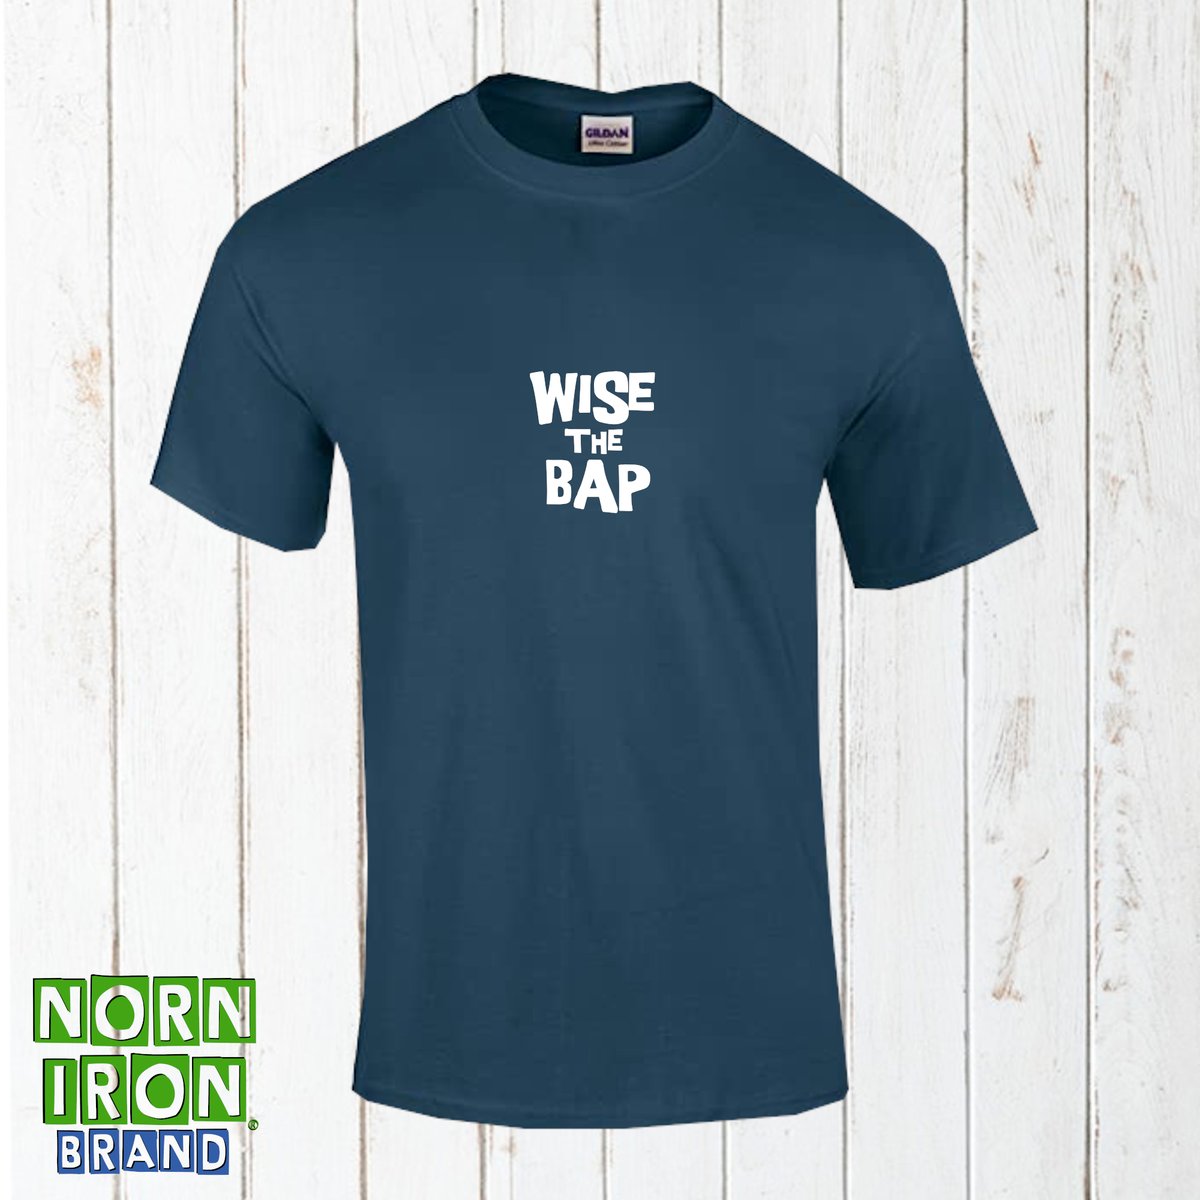 Wise The Bap! T-Shirt